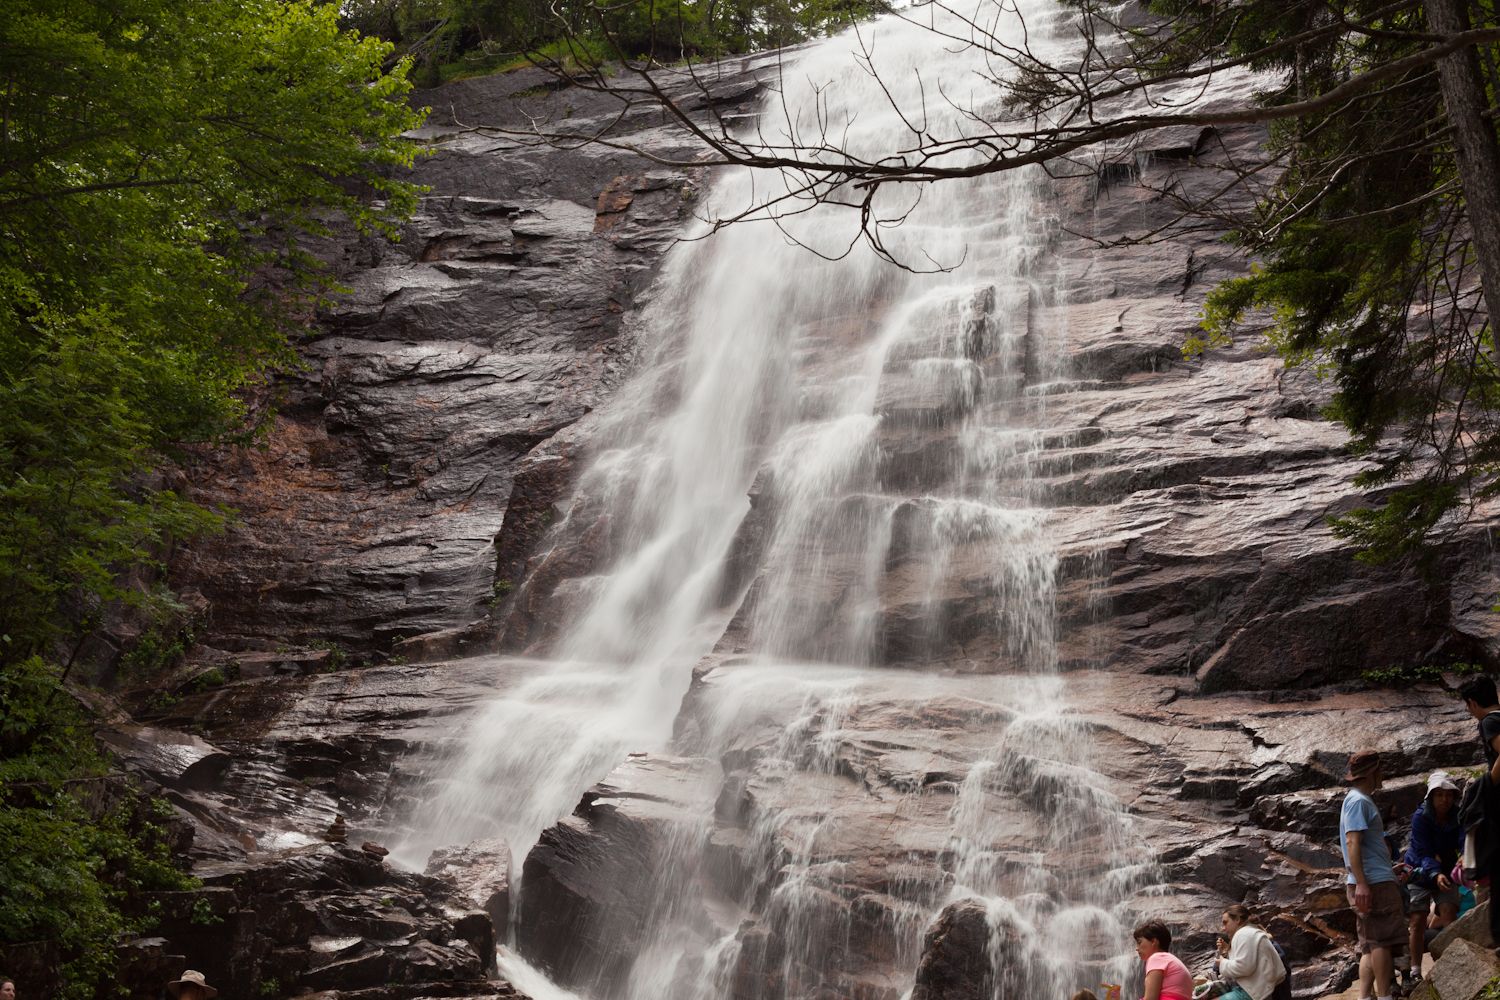  Arethusa Falls, a waterfall in the White Mountains of New Hampshire